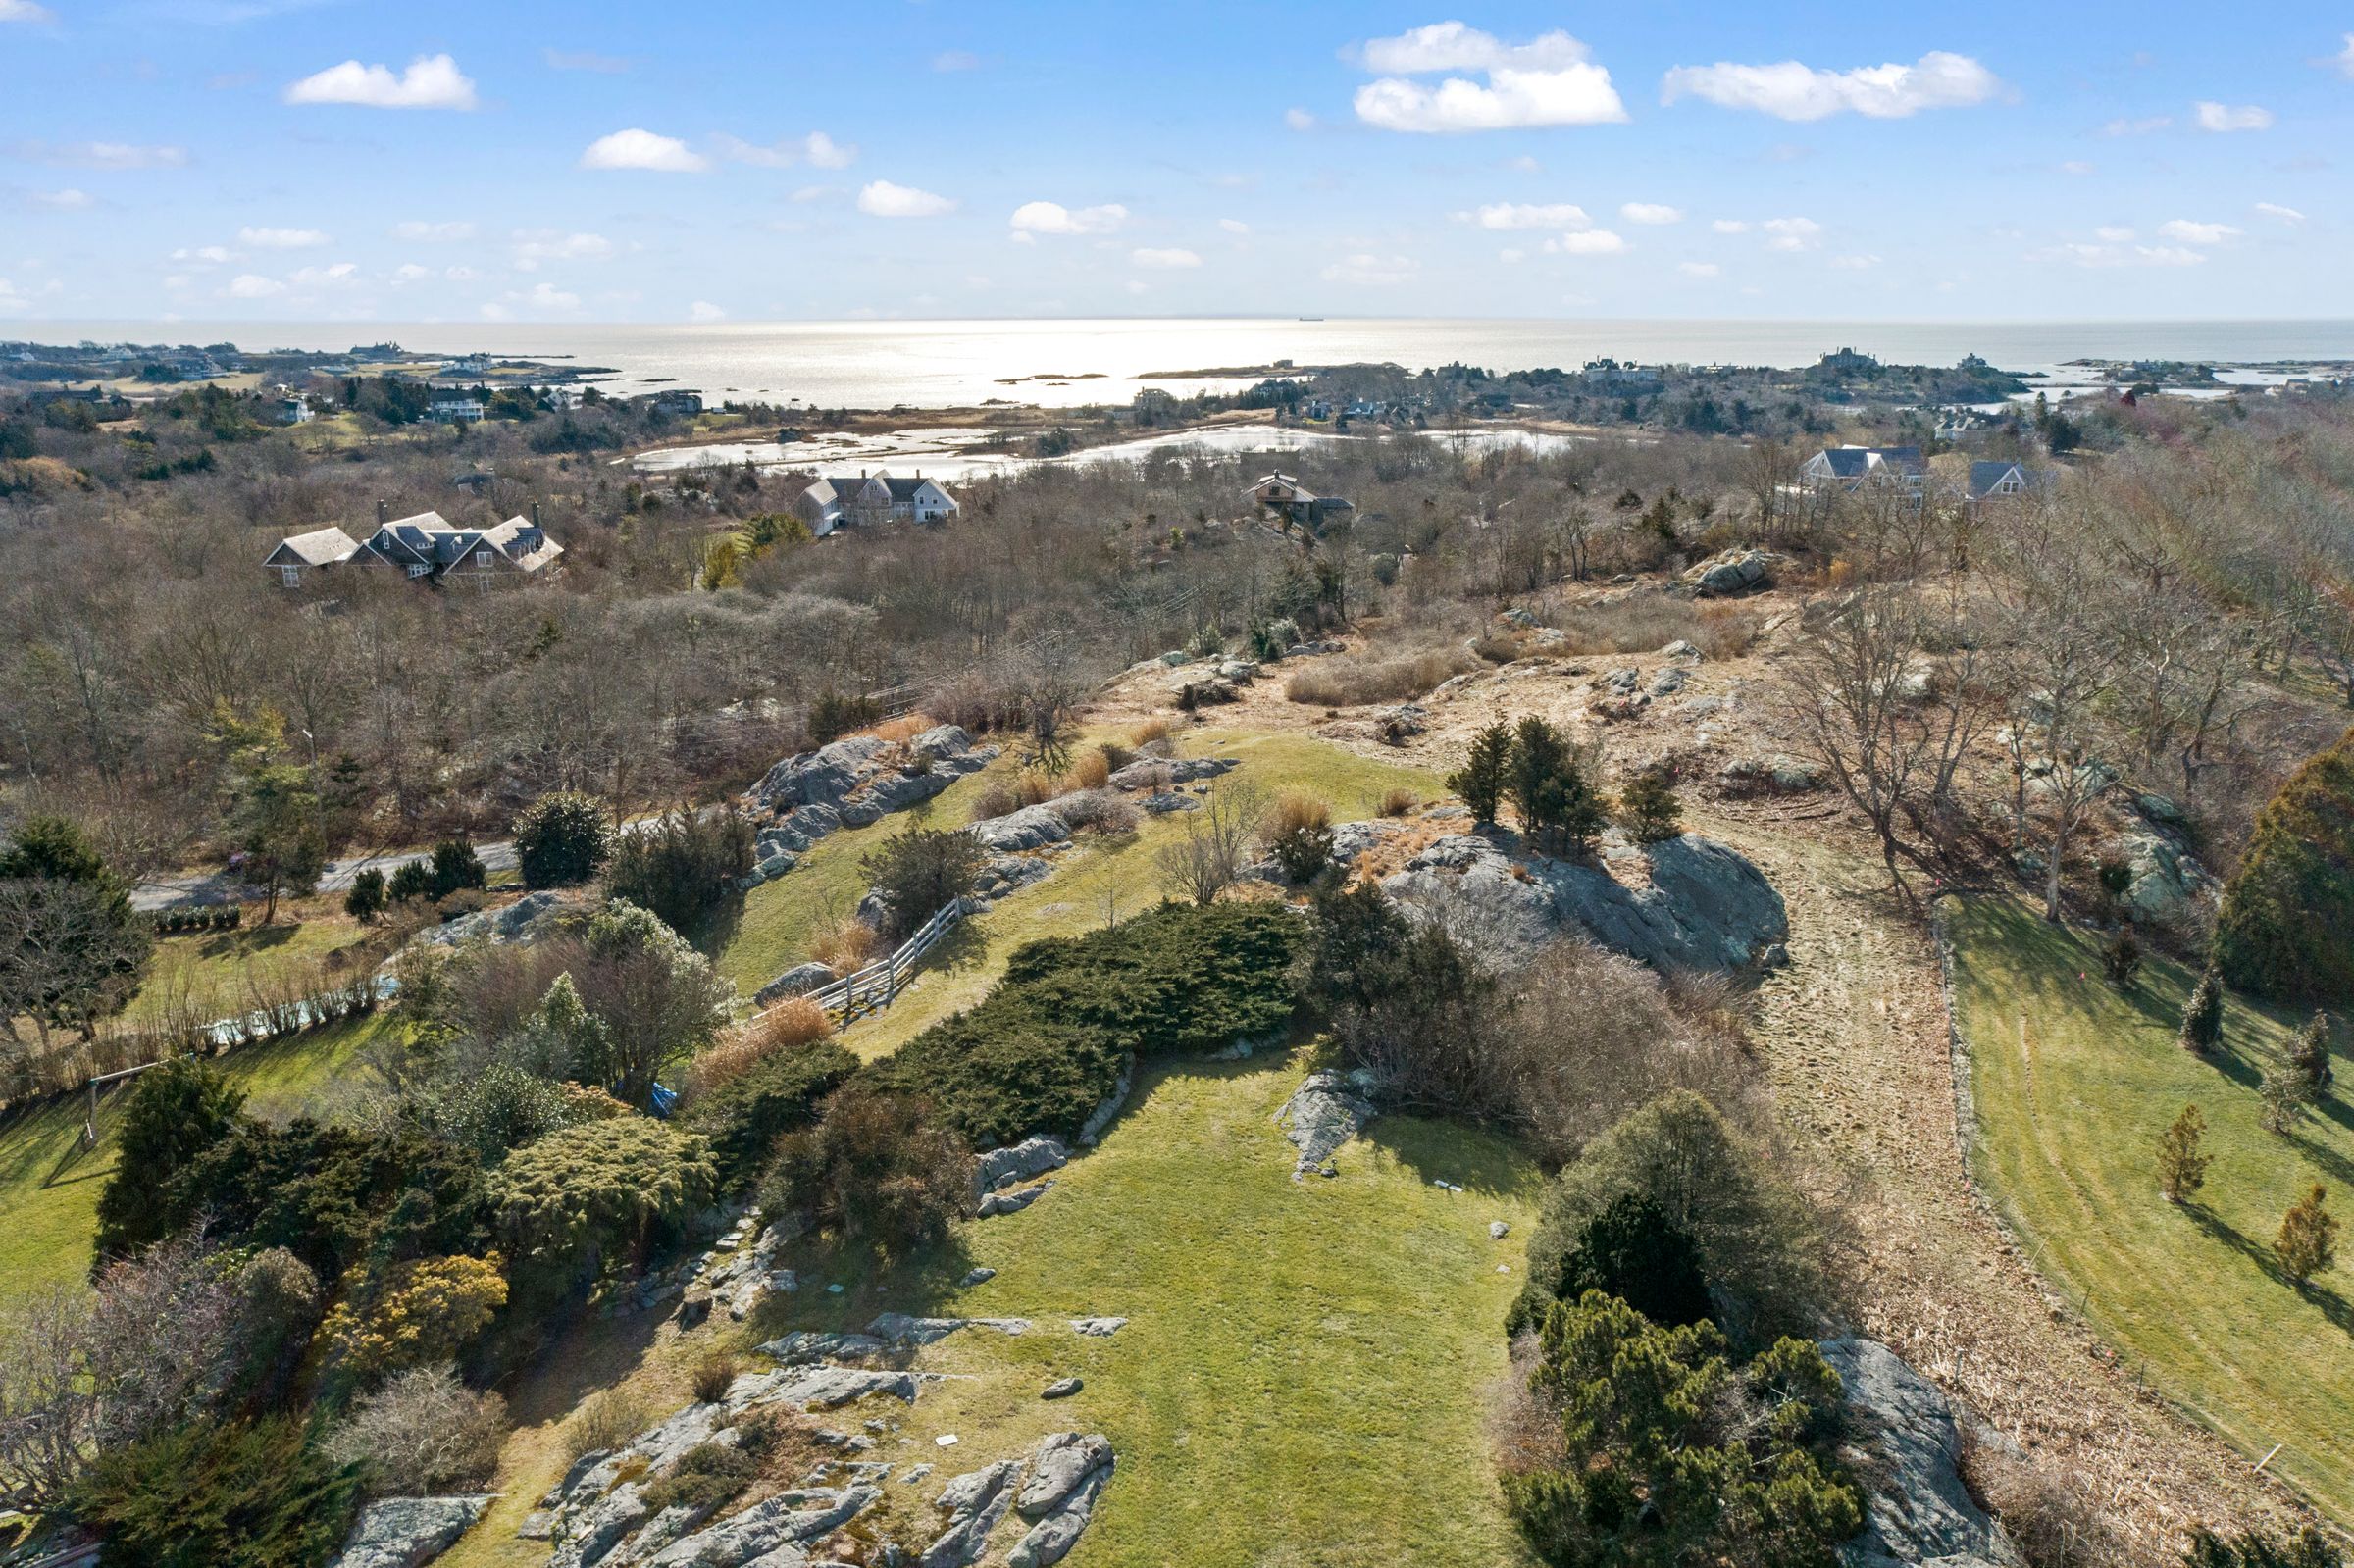 4-acre parcel of land on Beacon Hill Road sells for $3.9 million